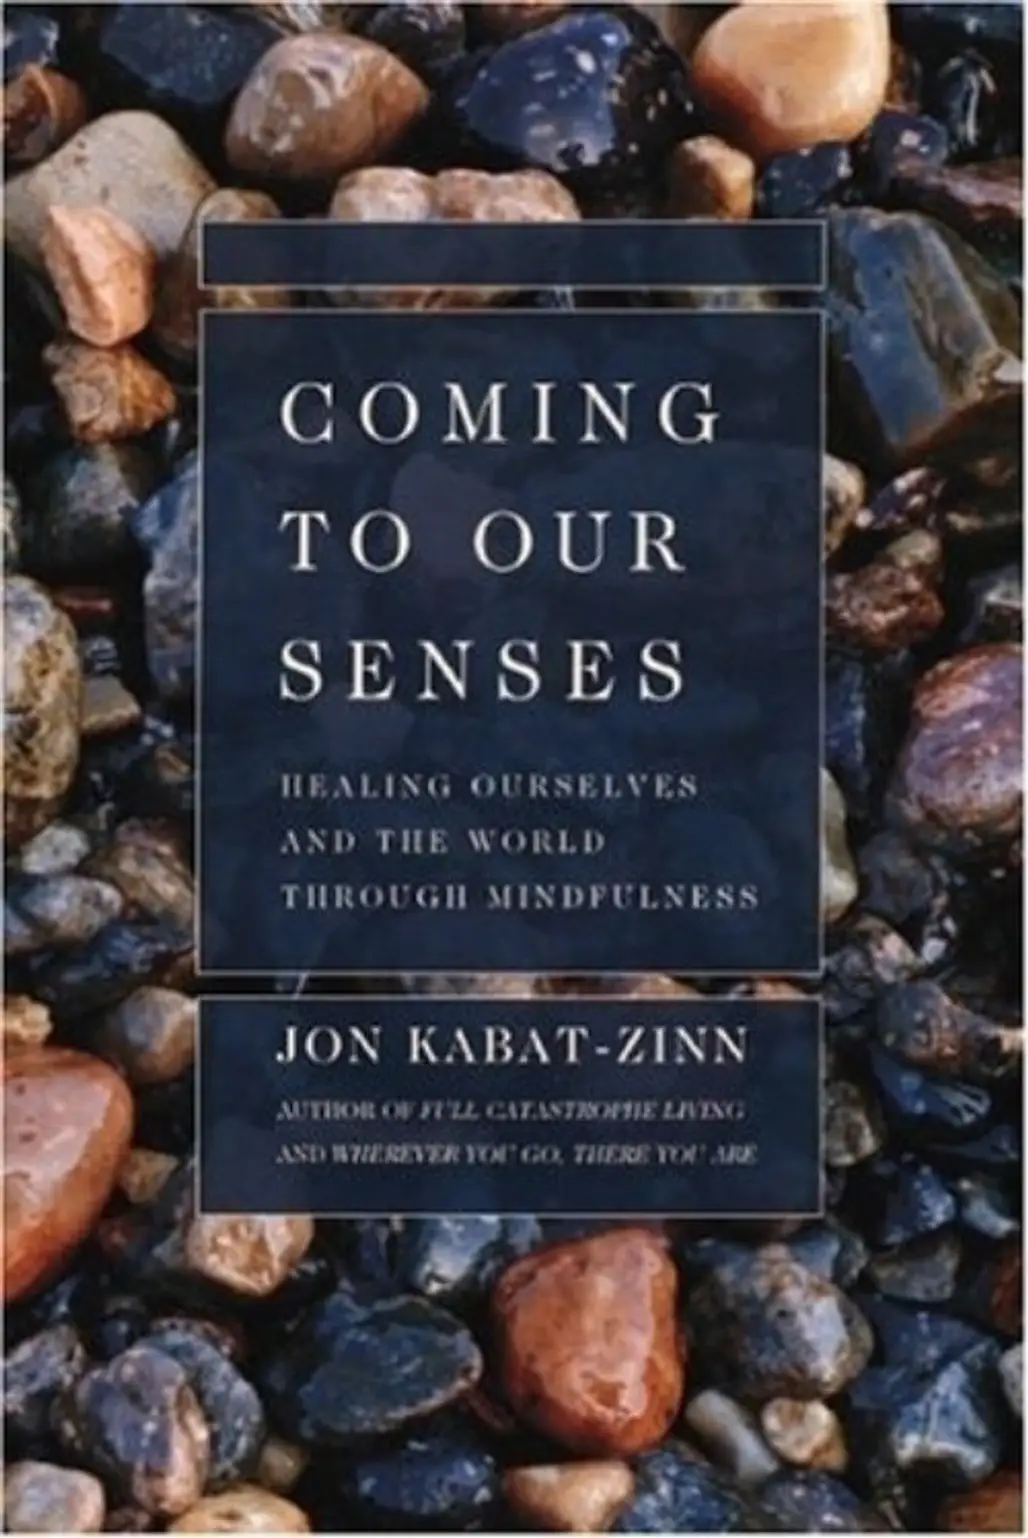 Coming to Our Senses: Healing Ourselves and the World through Mindfulness by Jon Kabat-Zinn